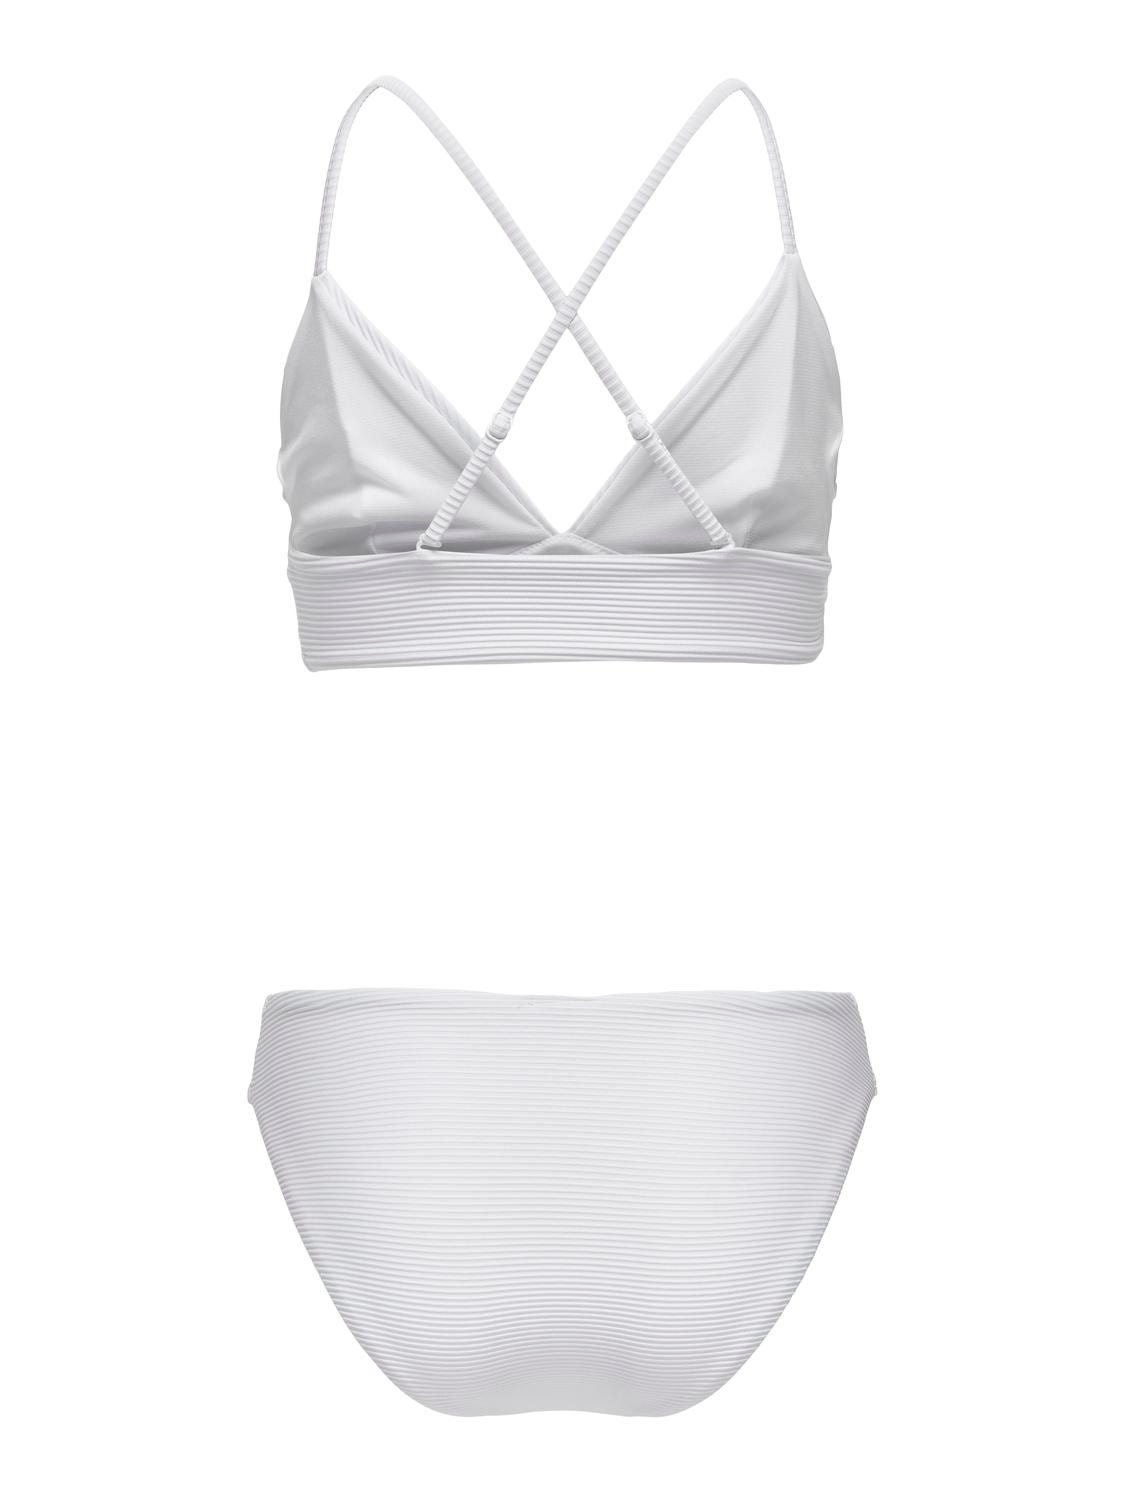 ONLY Solid Colored Bikini Set -White - 15304100